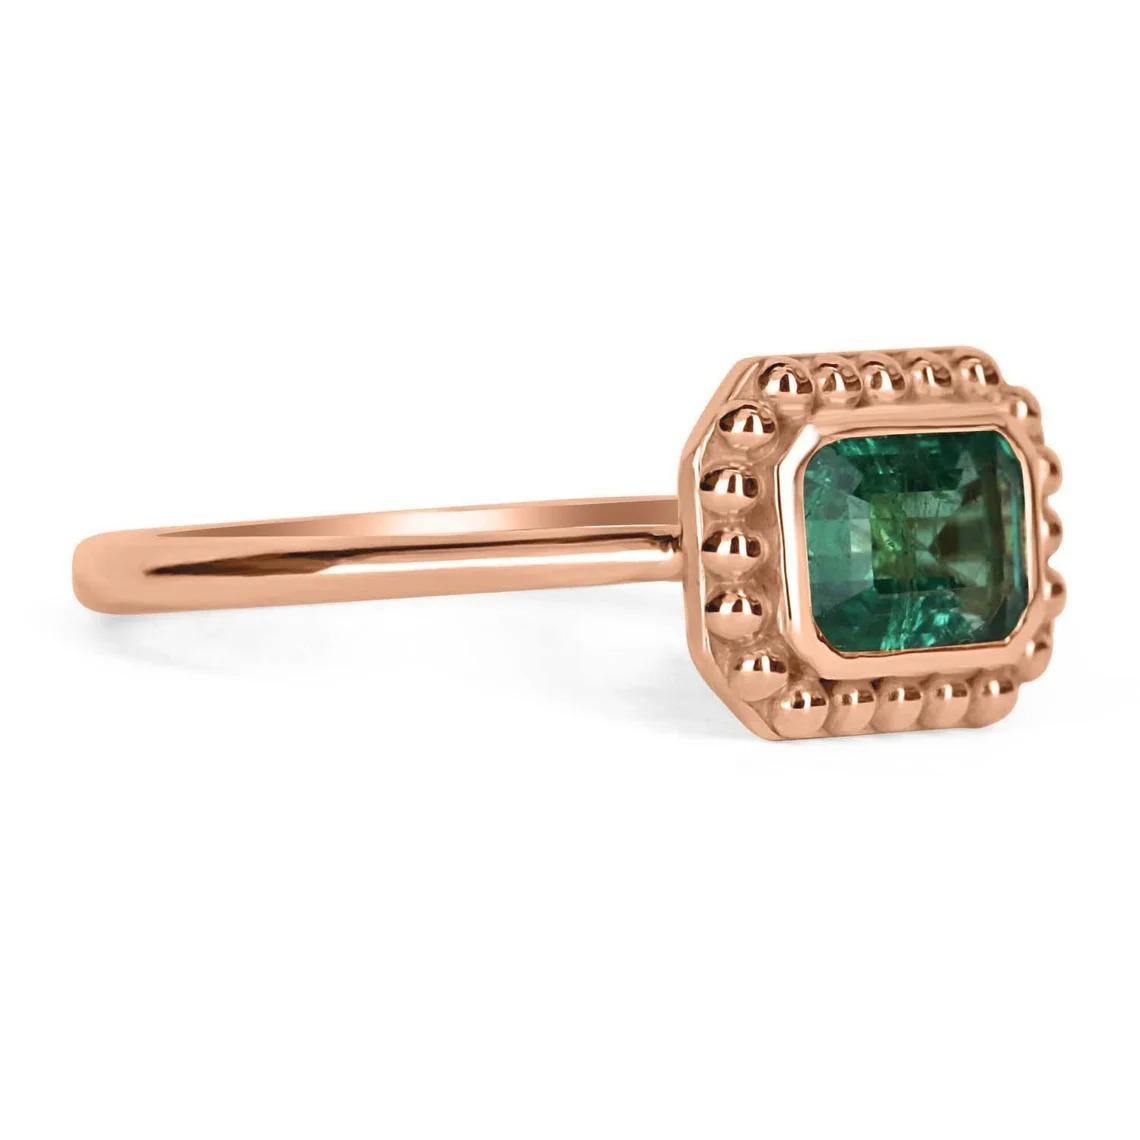 Displayed is a stunning East to West emerald-emerald cut solitaire ring in 14K rose gold. This gorgeous solitaire ring carries a 0.90-carat emerald in a bezel setting. Fully faceted, this gemstone showcases excellent shine and beautiful, rich green